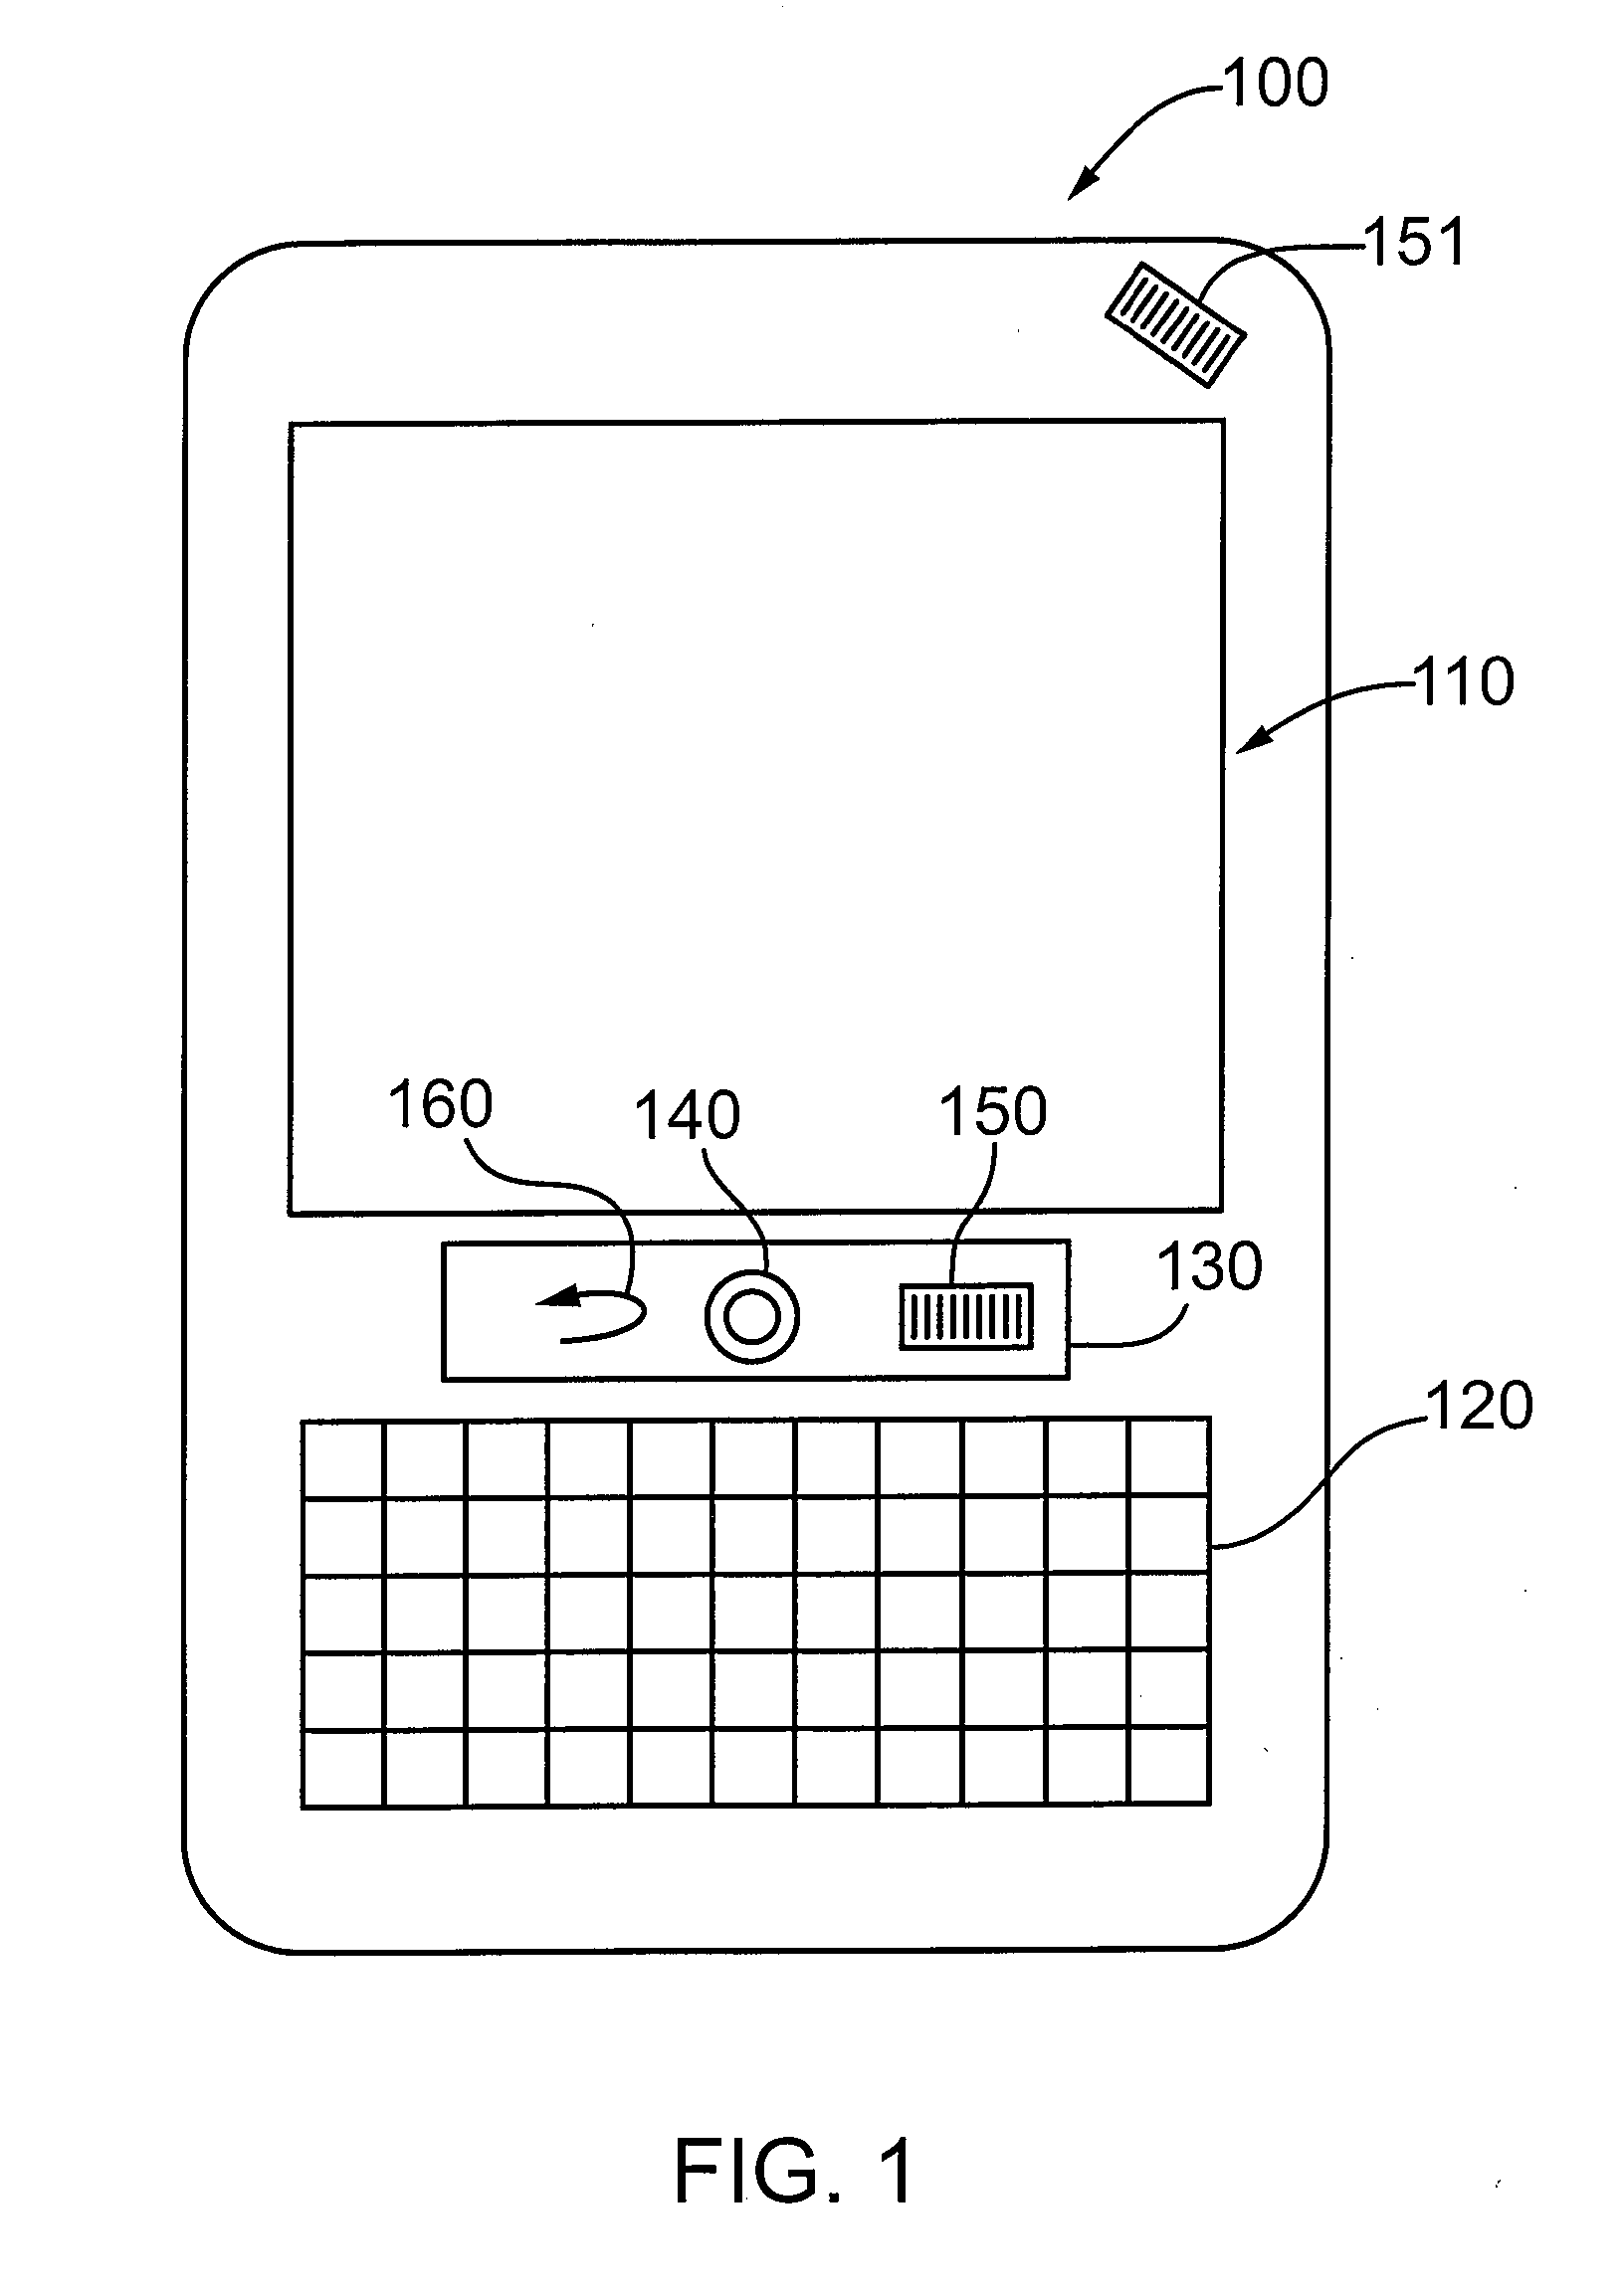 Apparatus and method for scrolling pages displayed on a handheld device